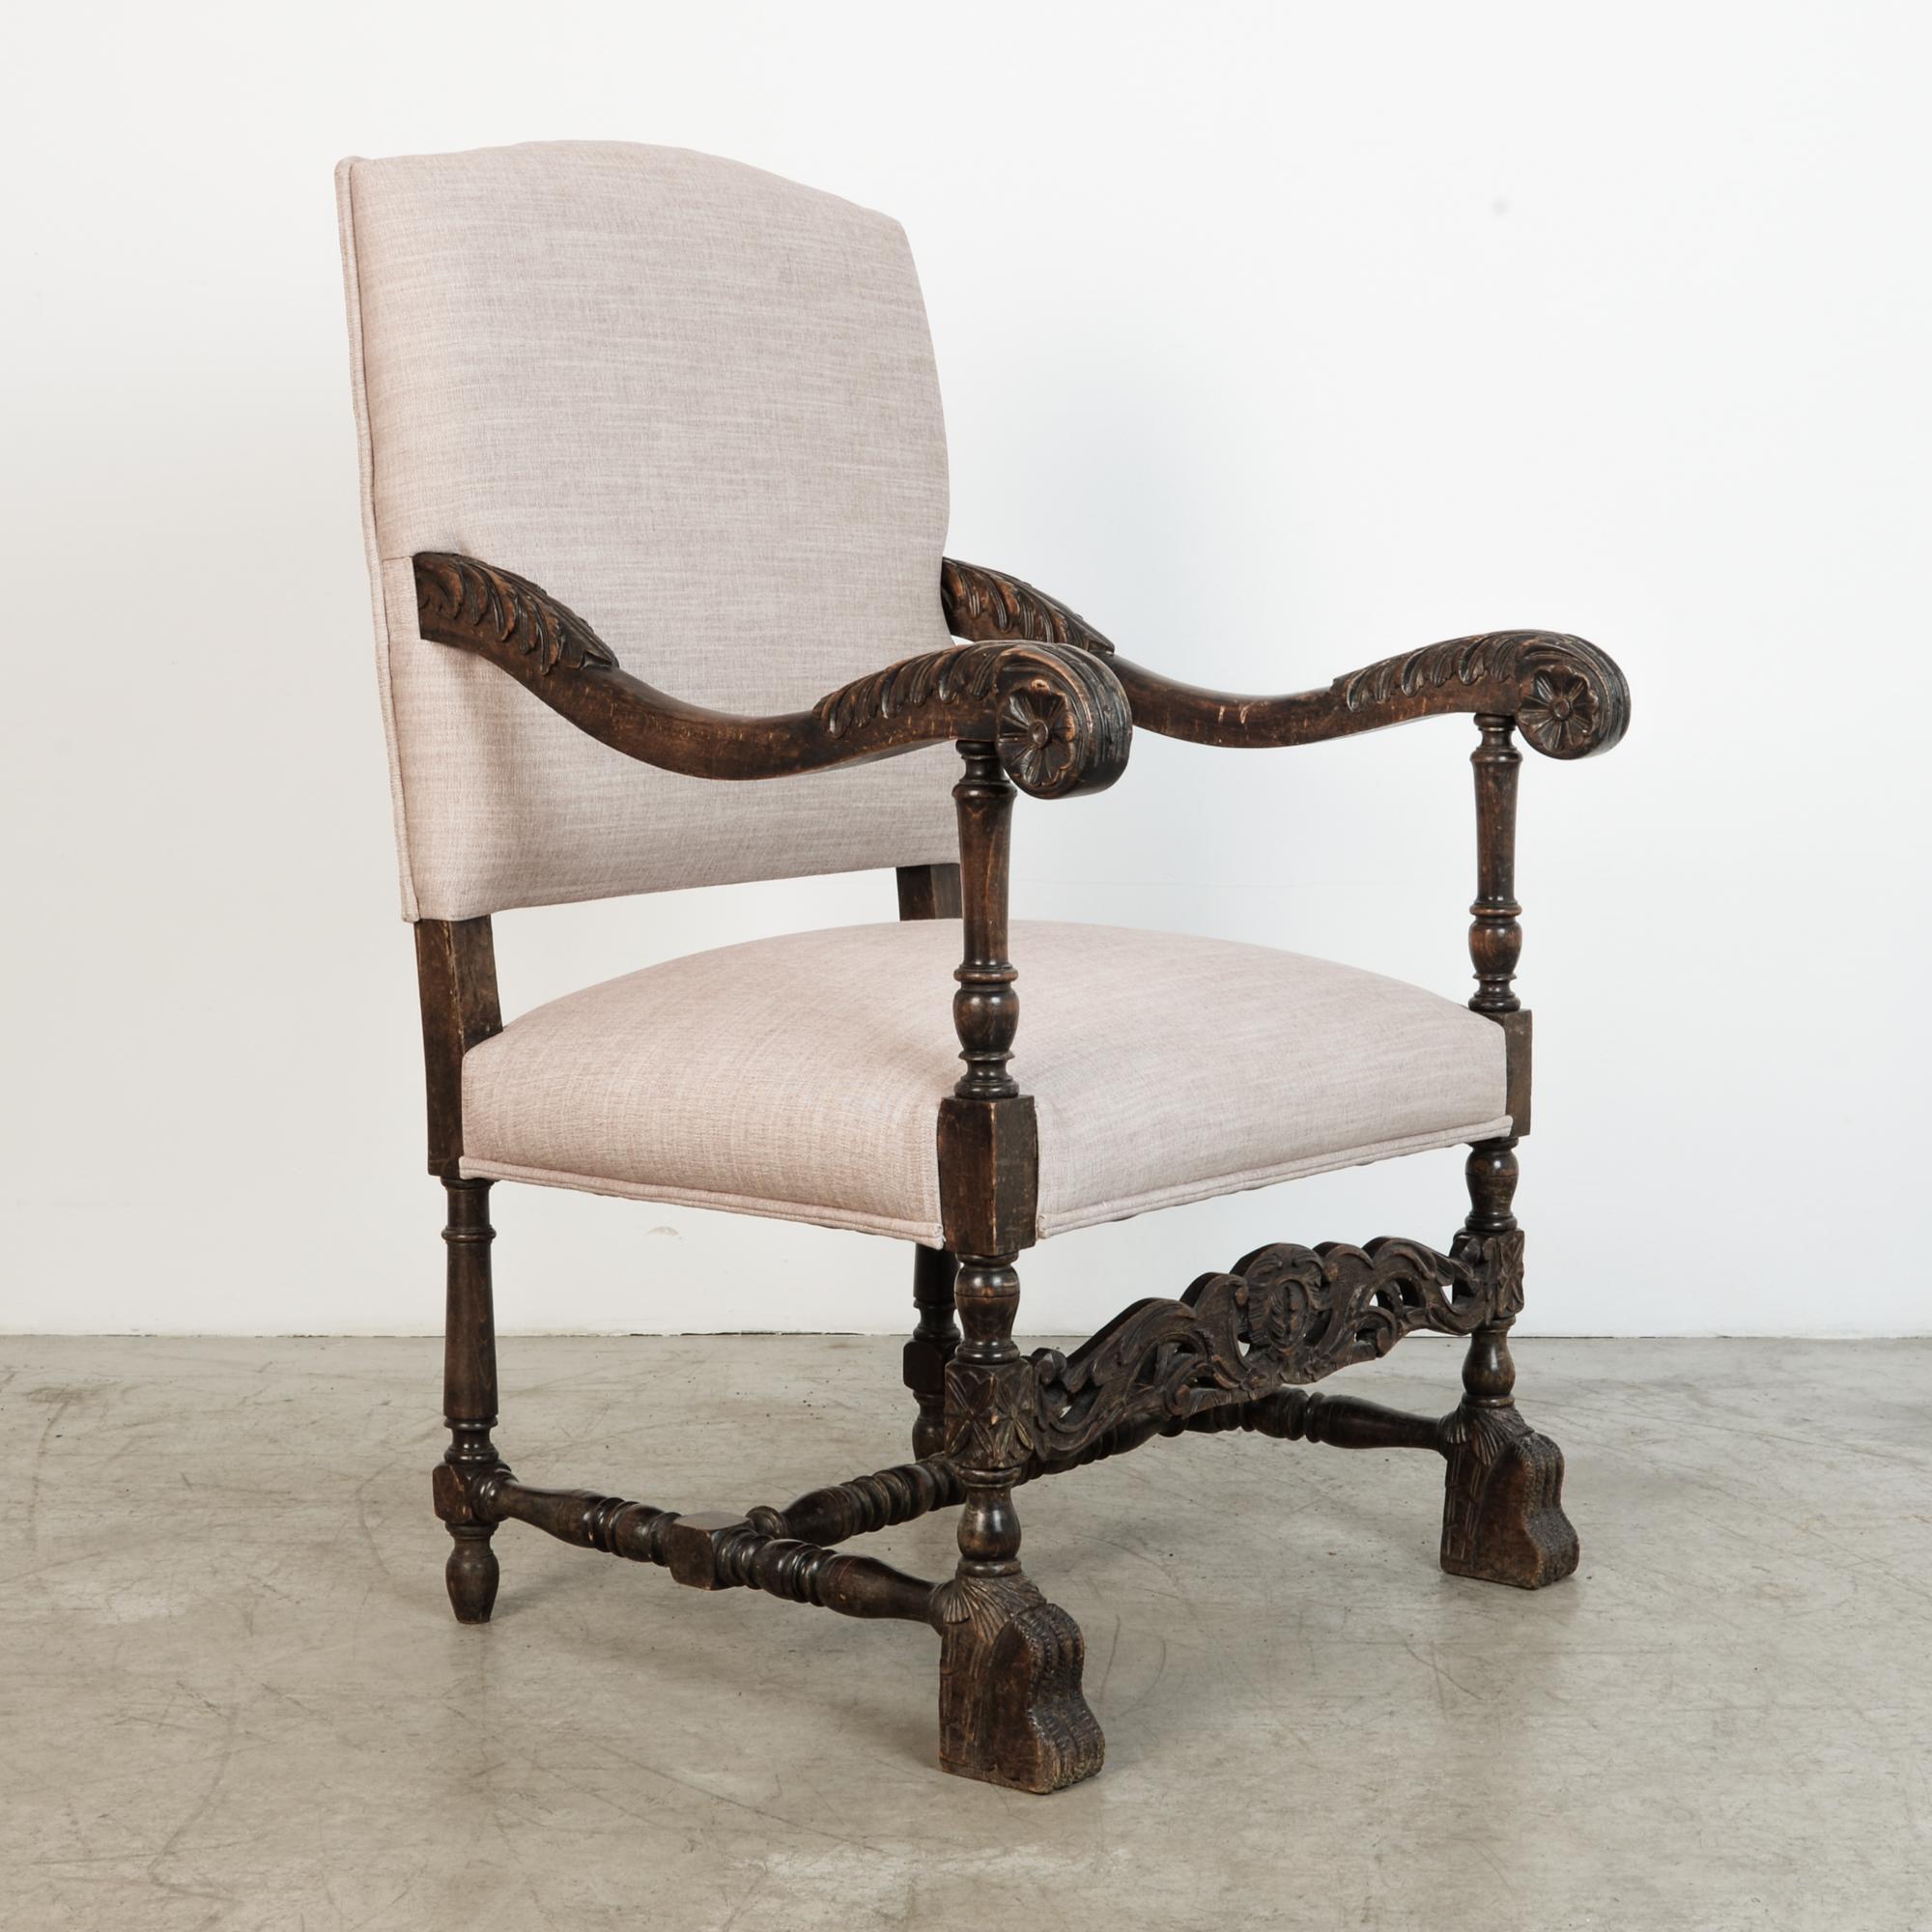 French Provincial Antique French Decorative Armchair